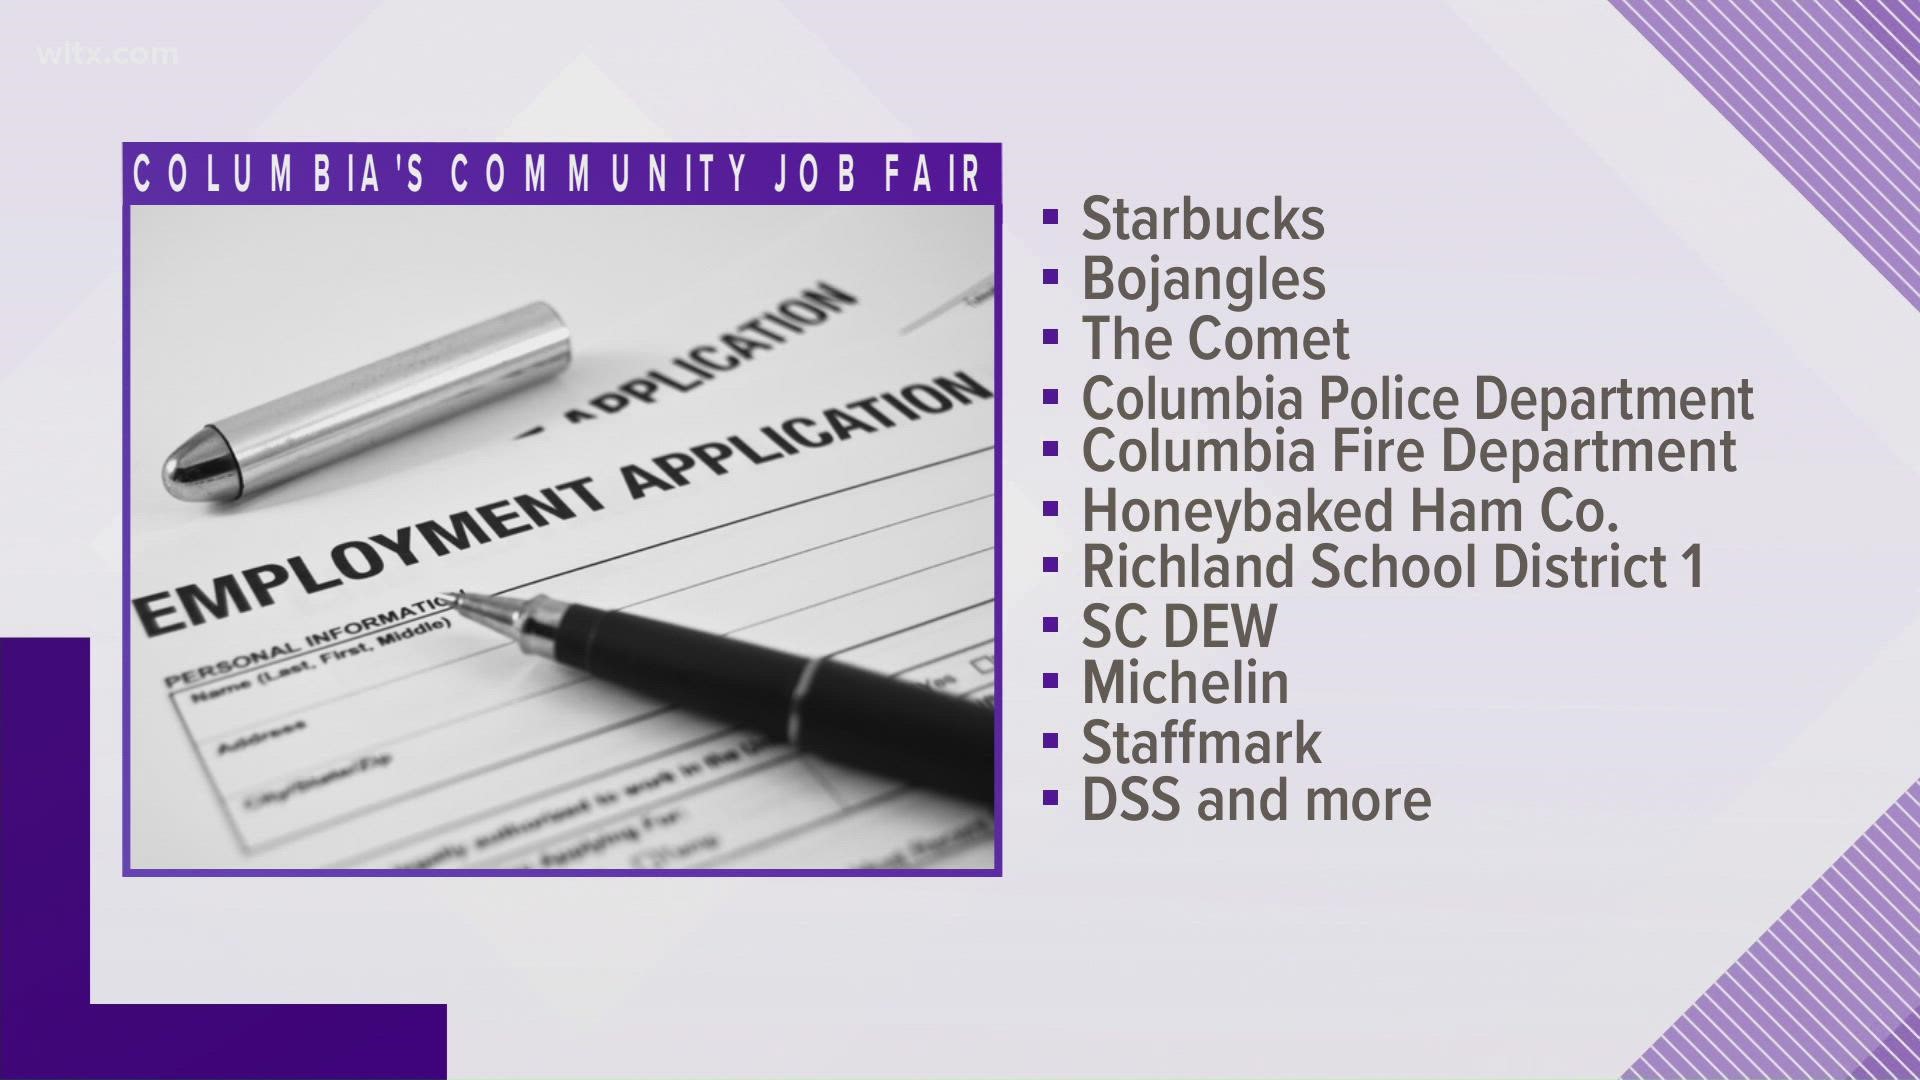 Visit Drew Wellness Center on October 21 from 10 am to 2 pm for a community job fair.